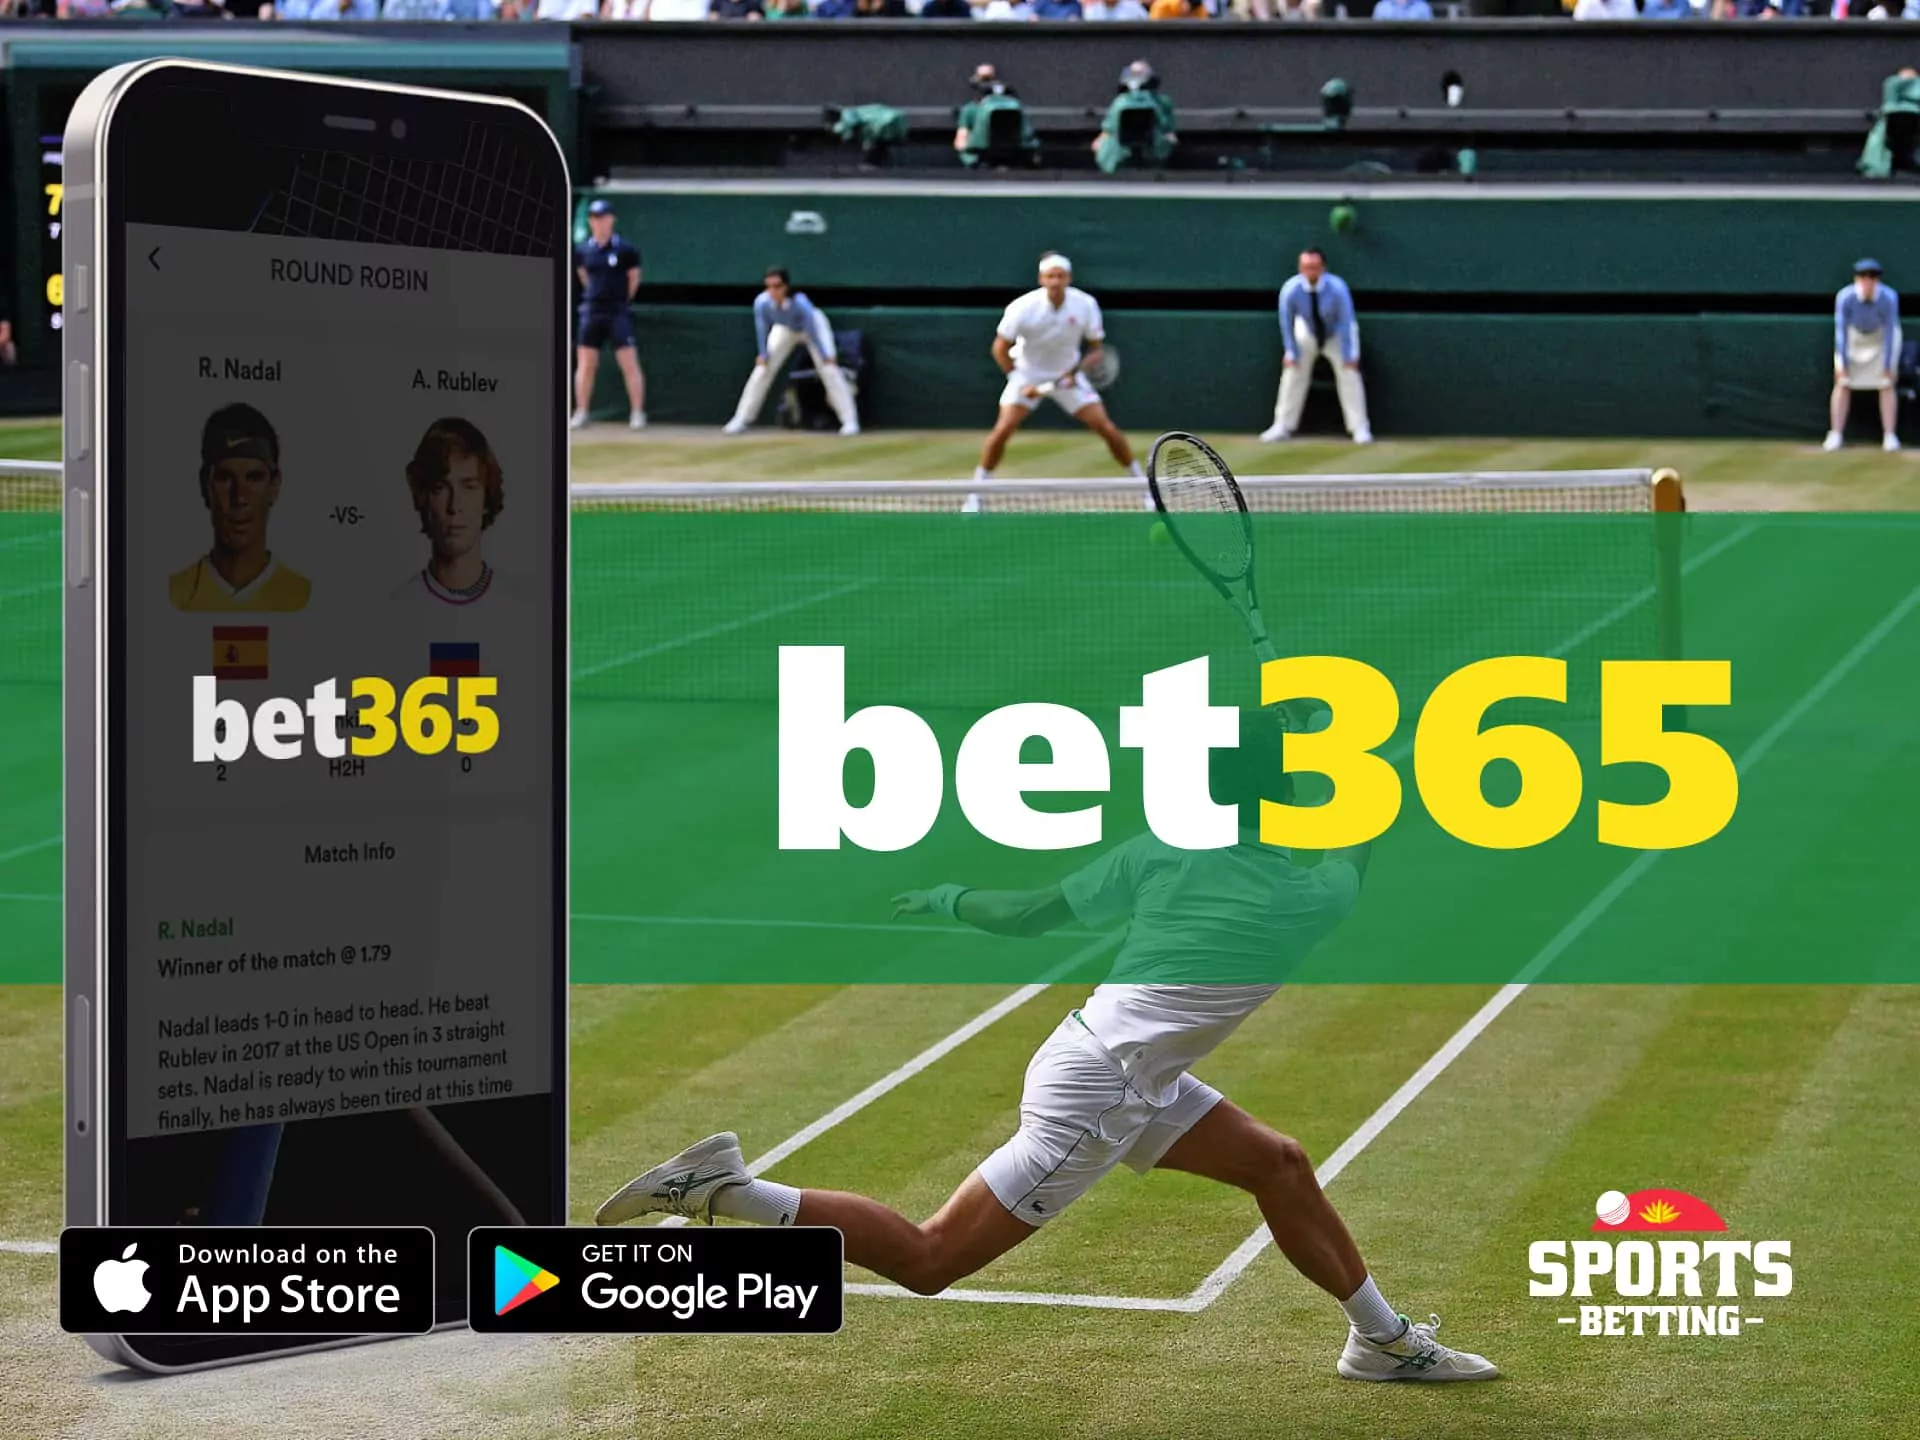 Bet365 tennis betting site with a wide range of available payment systems.